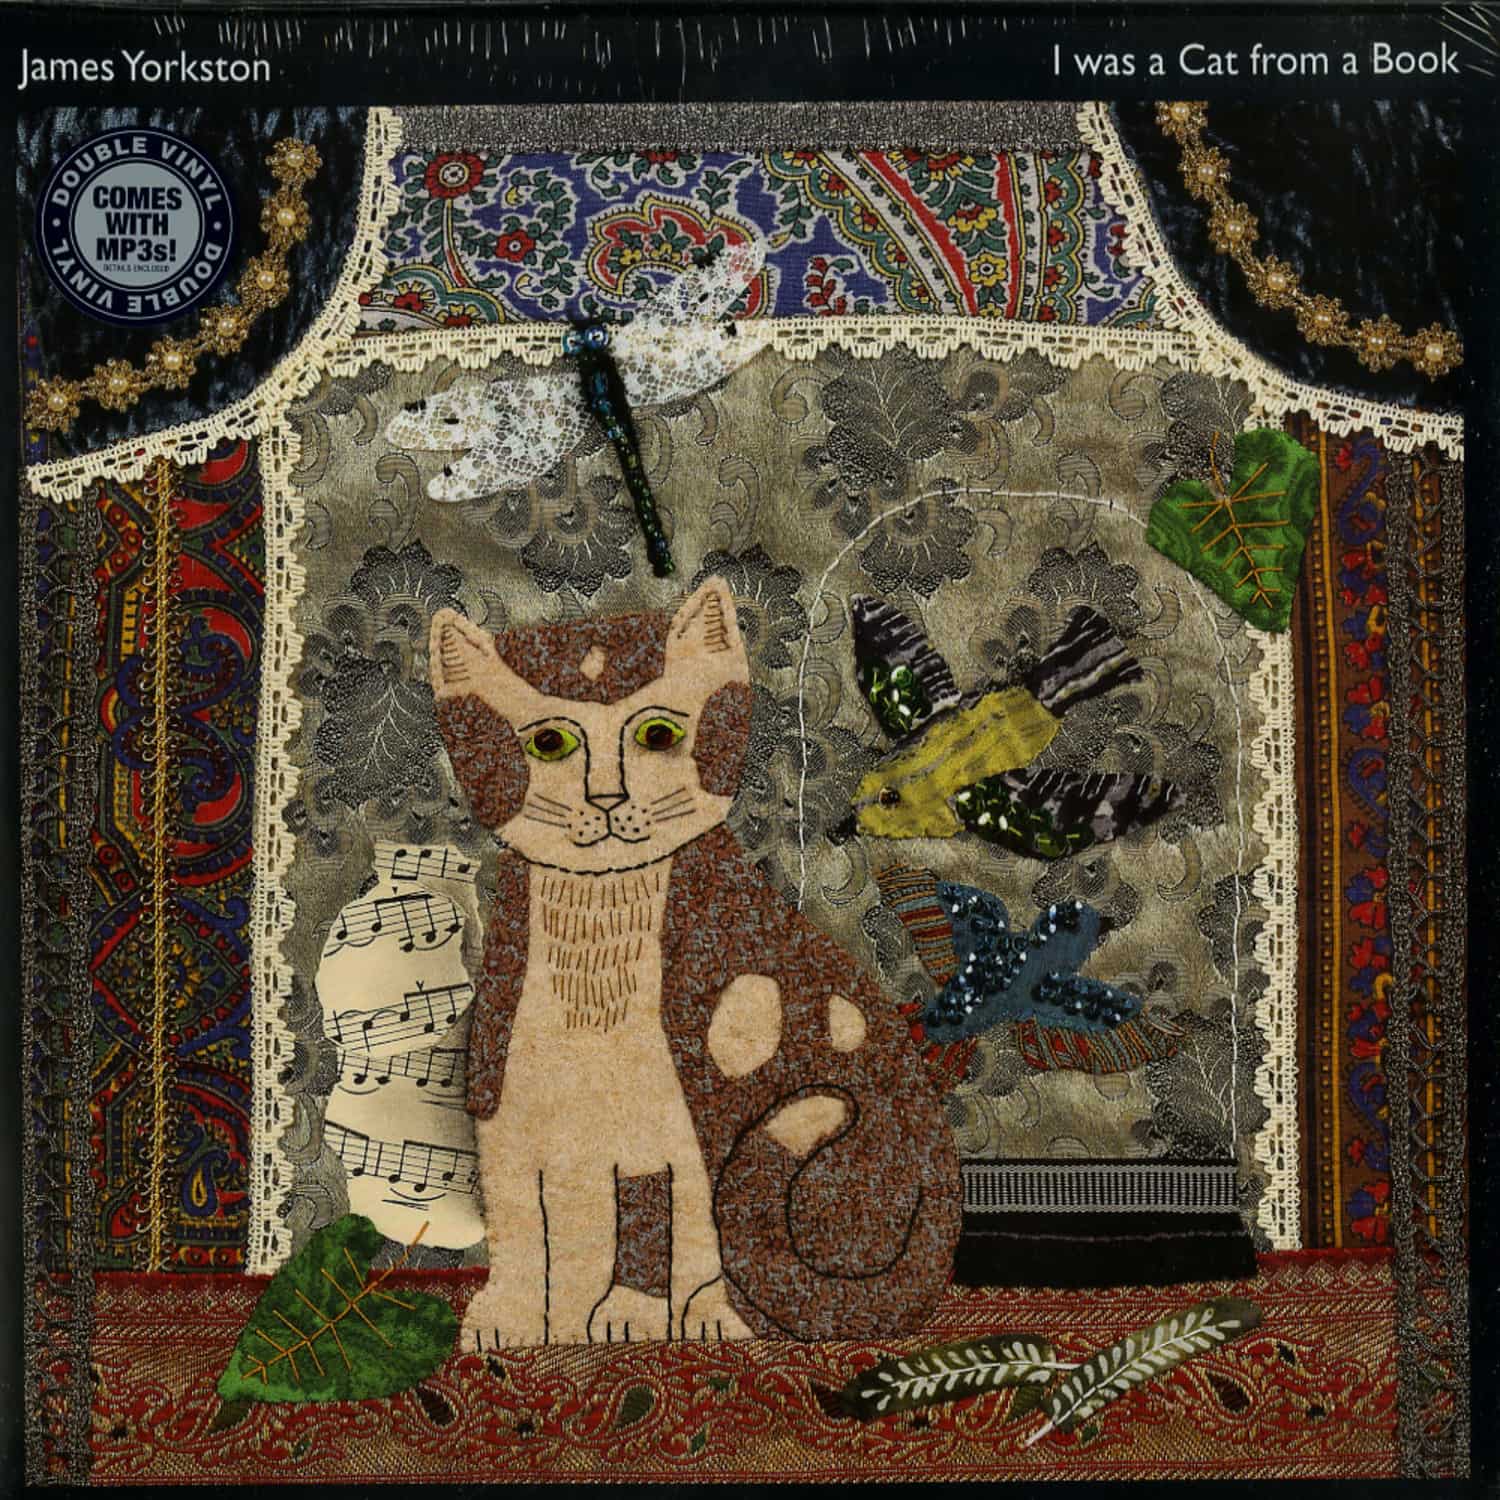 James Yorkston - I WAS A CAT IN A BOOK 